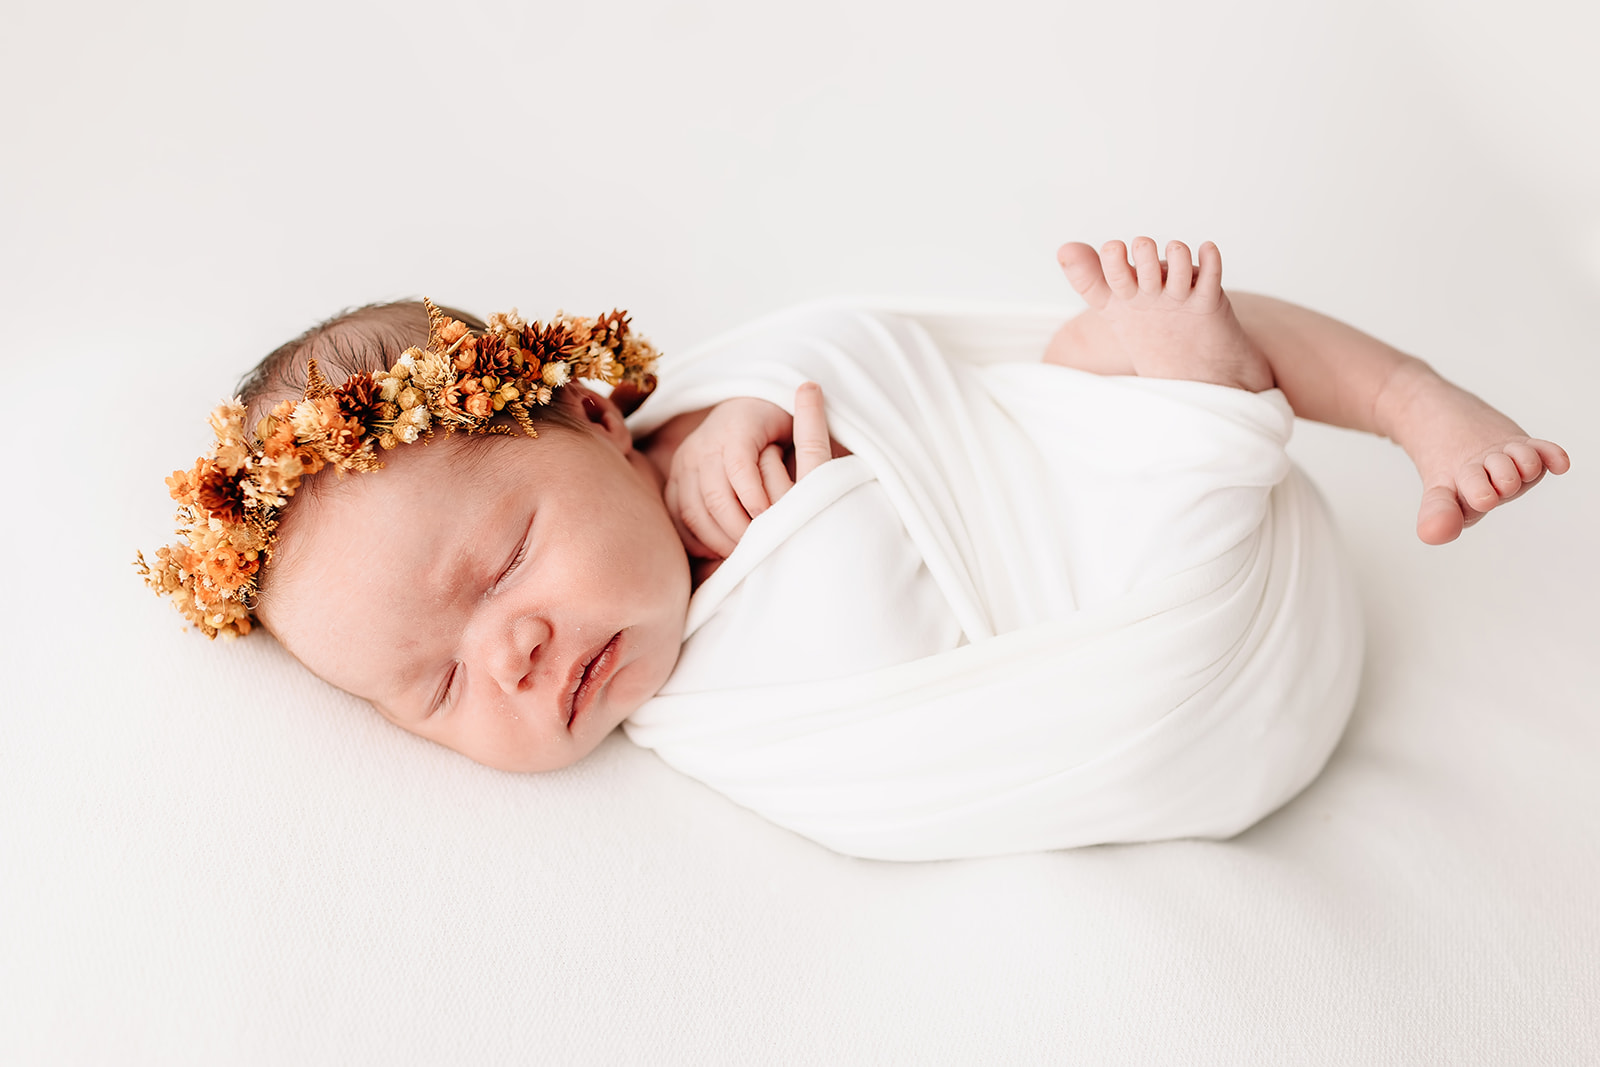 A newborn baby wiggles out of a swaddle while sleeping in on a white bed with a floral headband